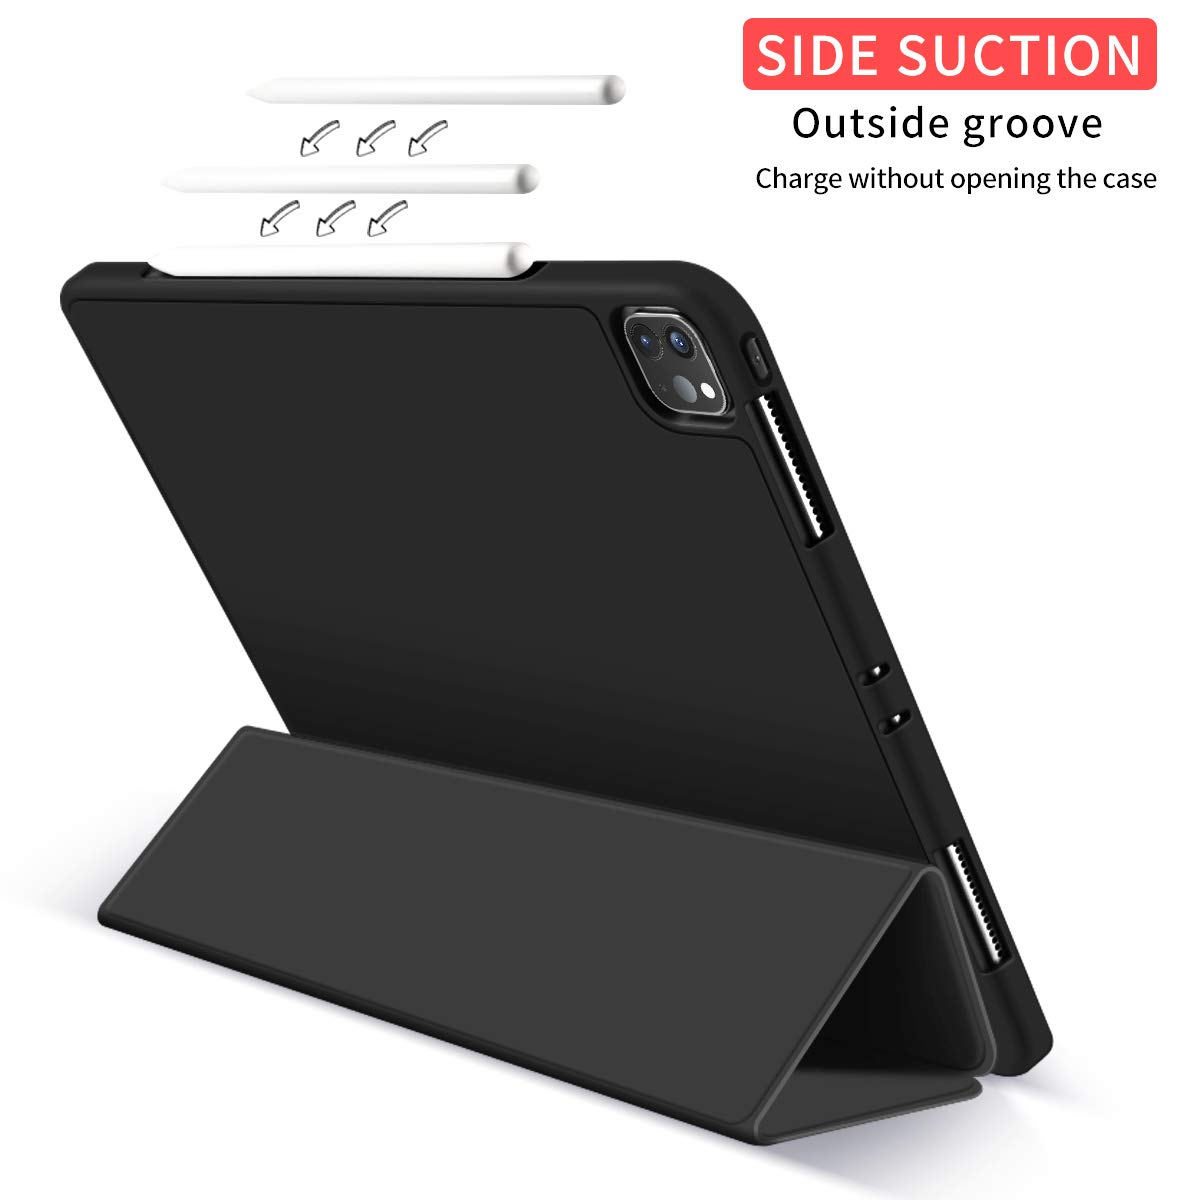 2020 Antishock Case With Soft Back Shell For iPad Pro 12.9 2020